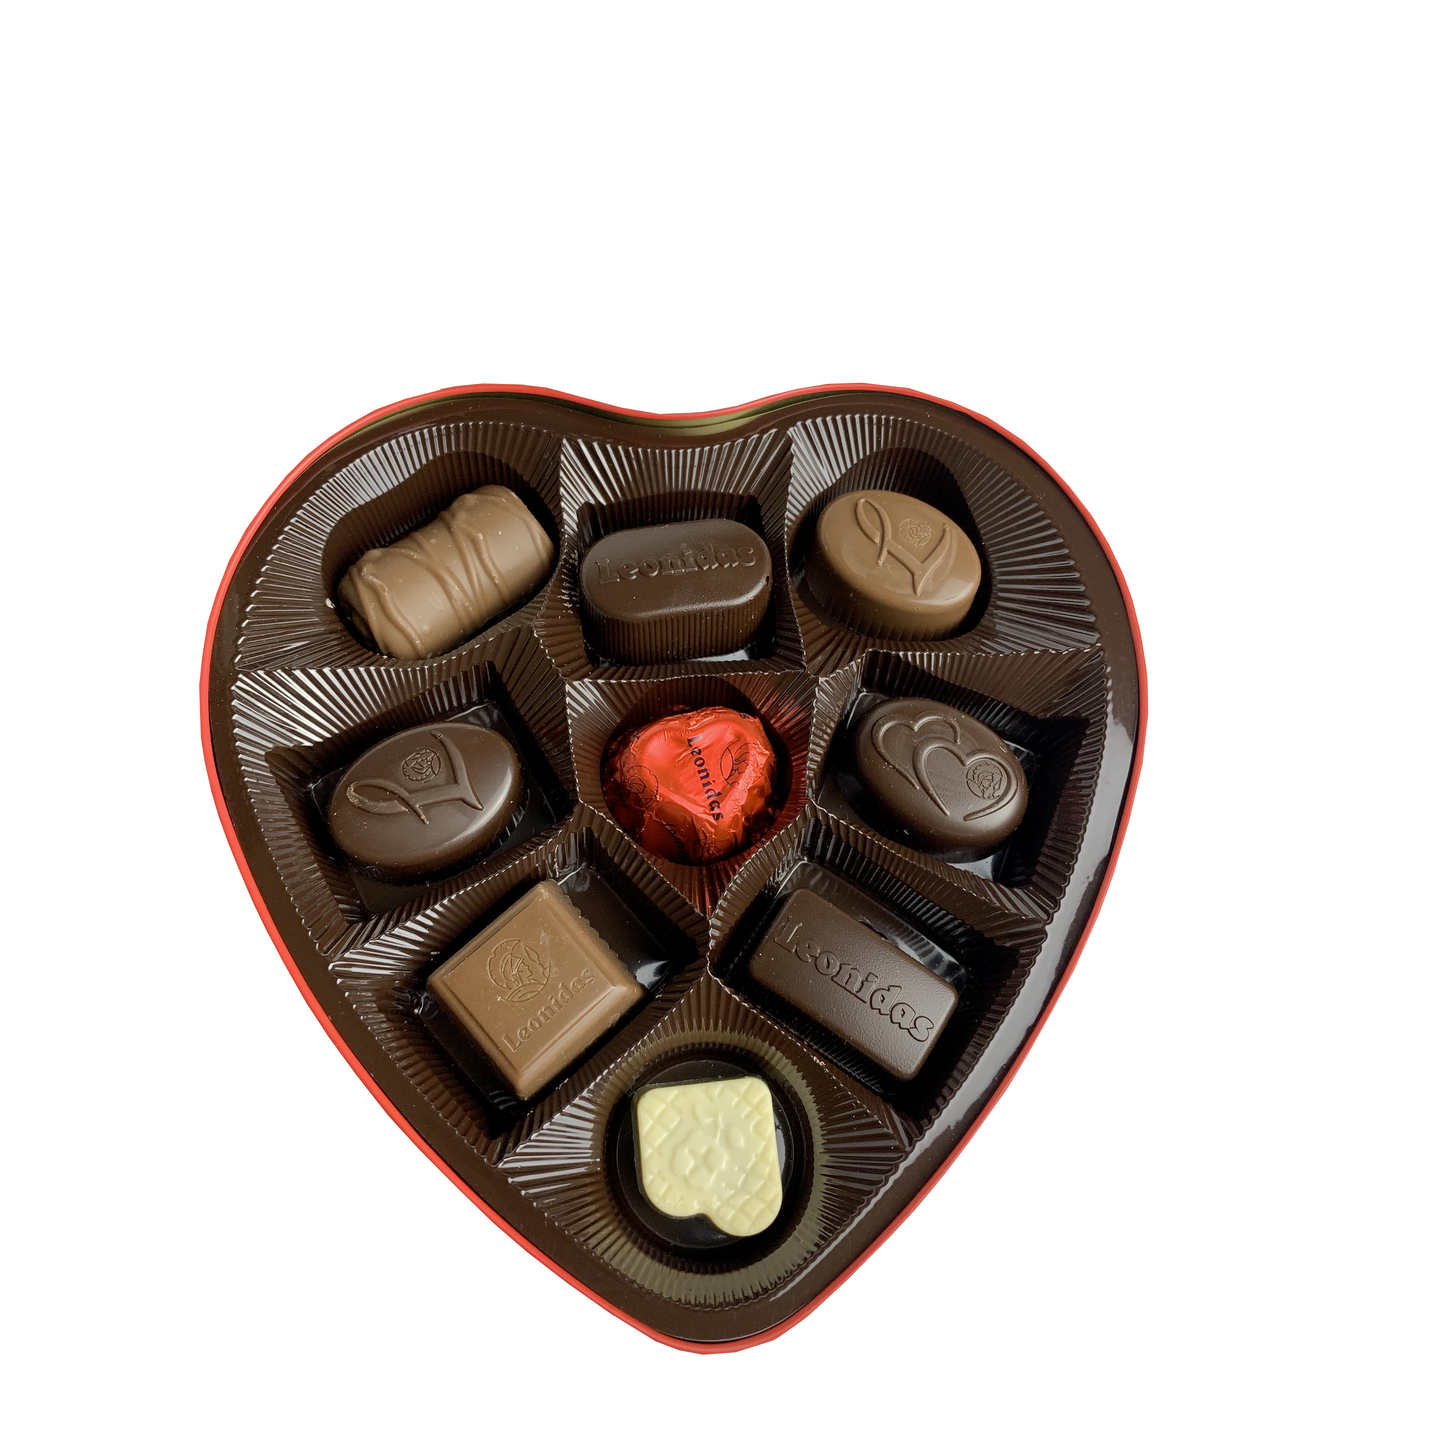 Heart filled with 9 Leonidas chocolates (metal box) - Valentine's Day